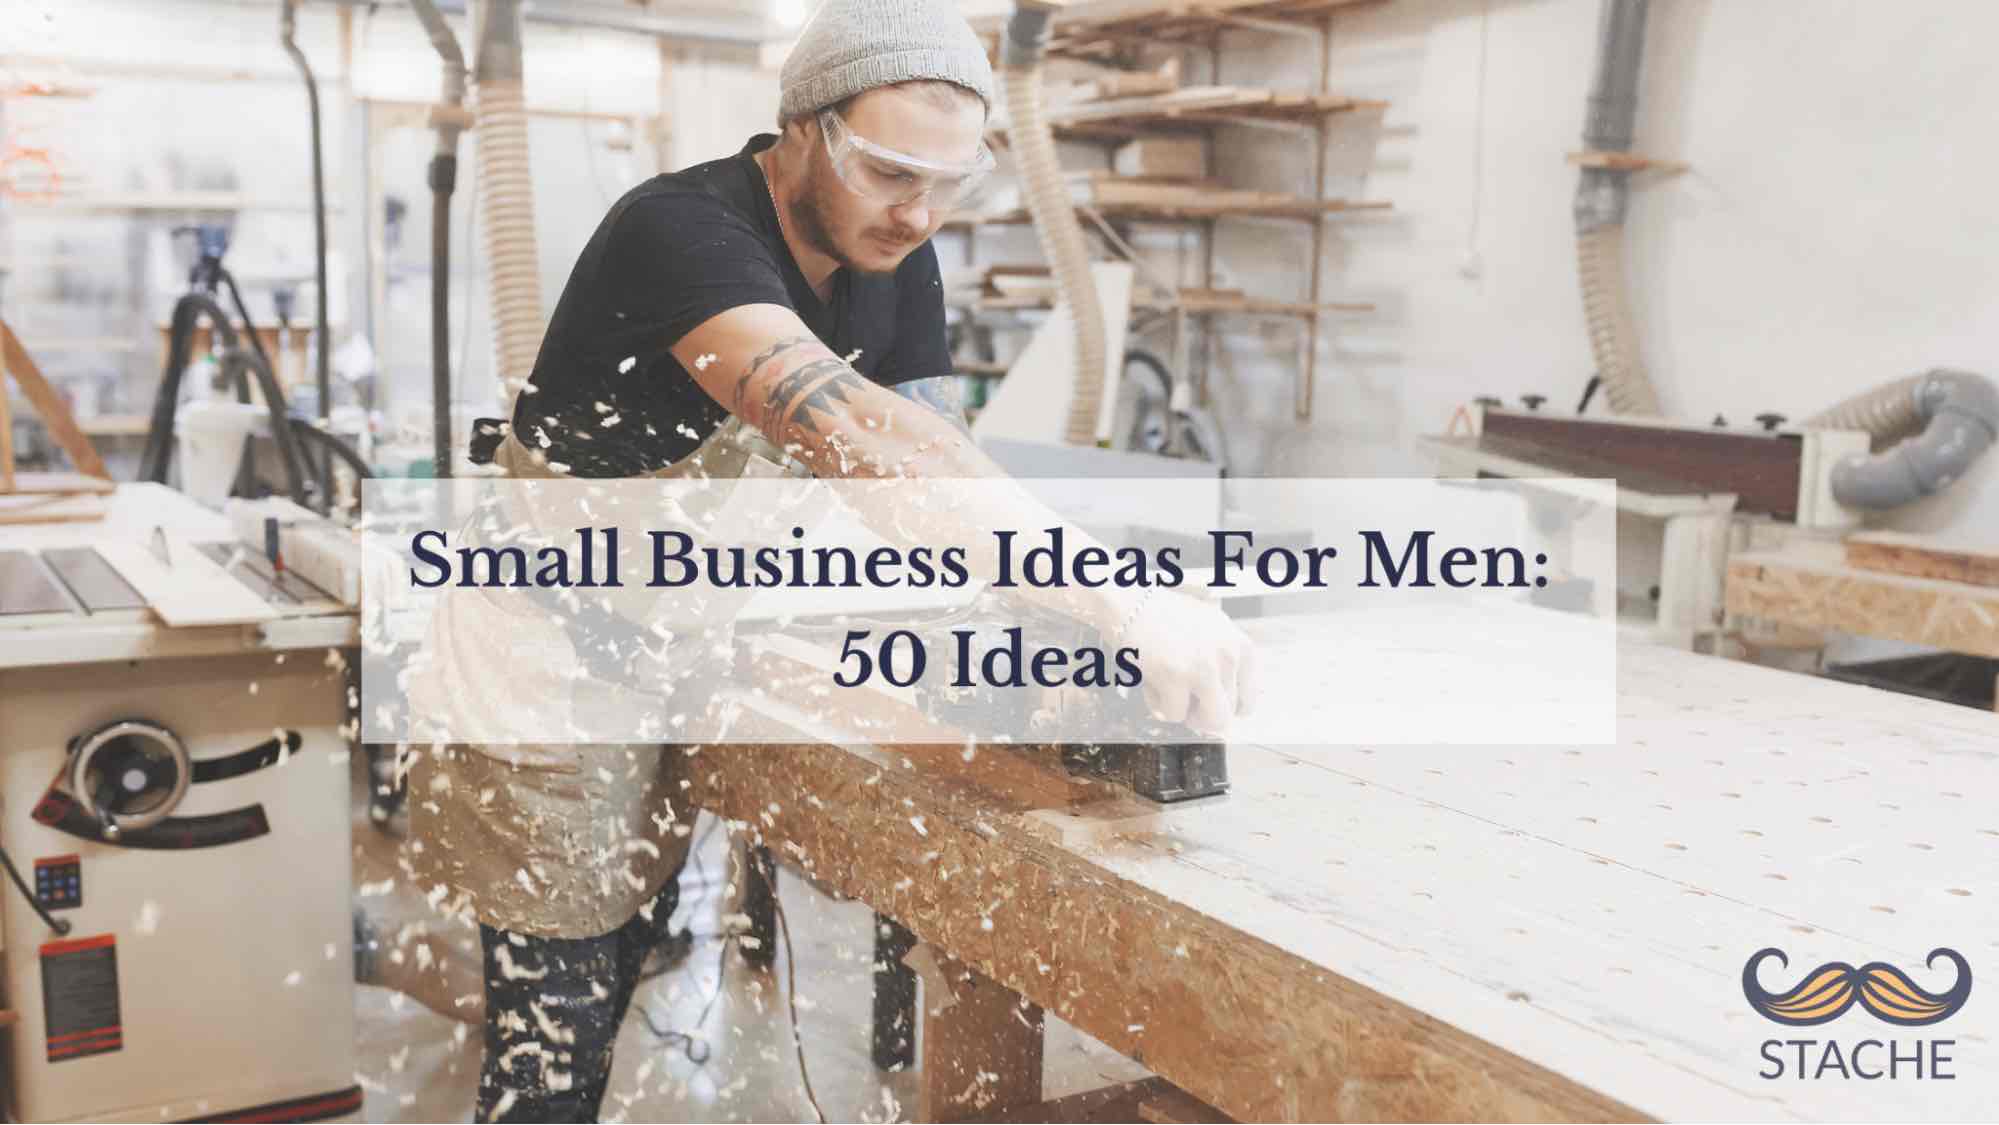 Small Business Ideas For Men